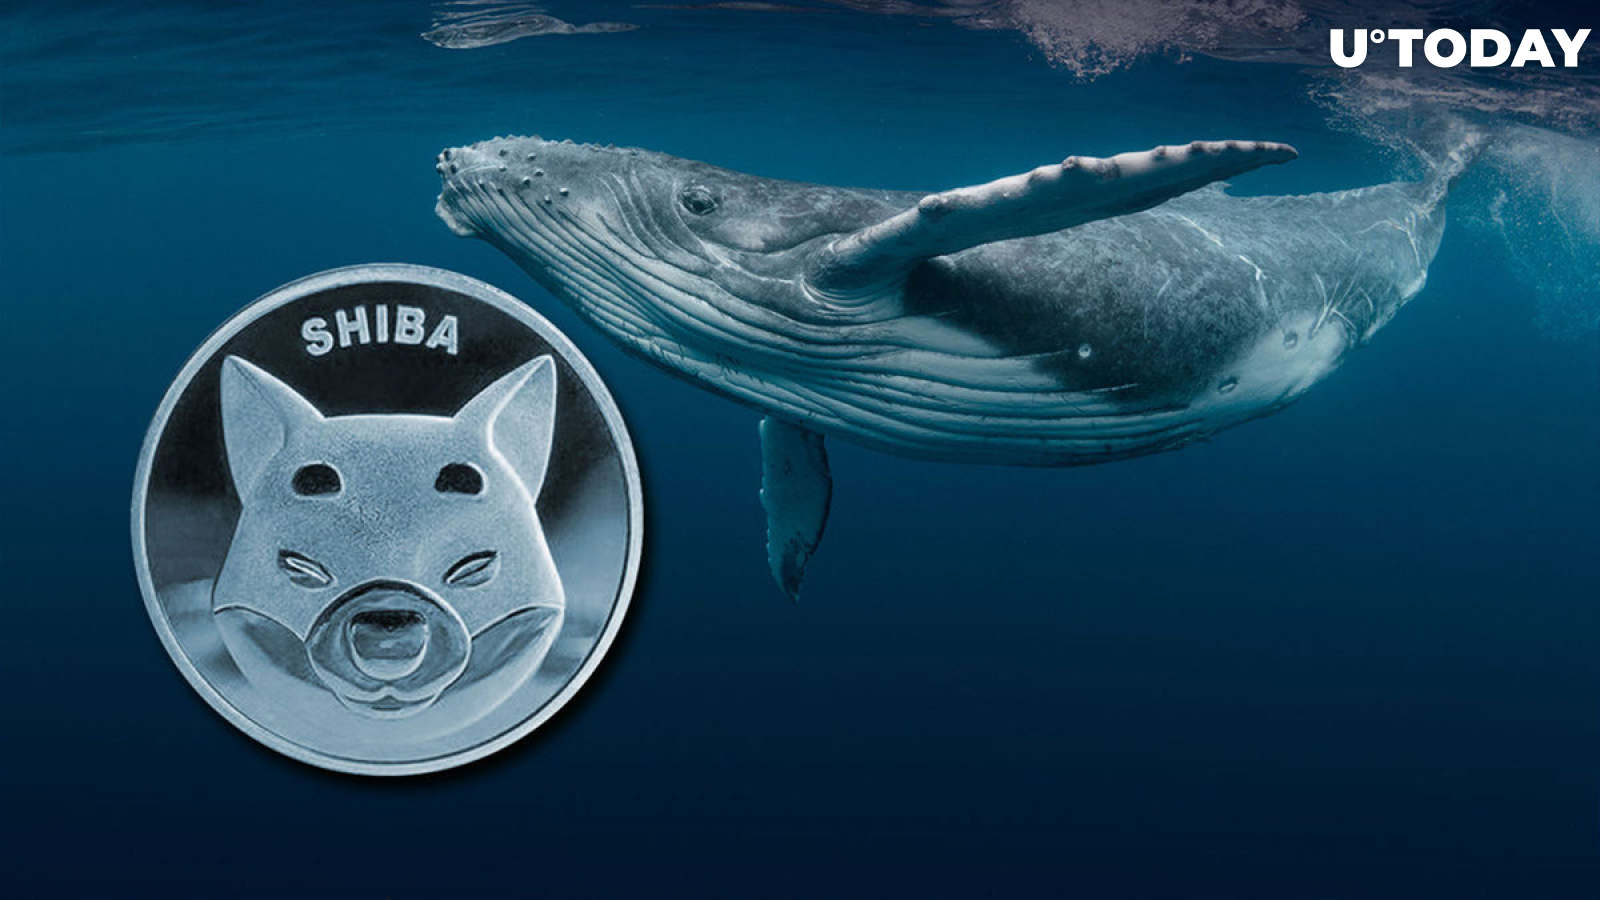 8.36 Billion Shiba Inu Bought by Whales Within Hour on Dip, Here's What Comes Next